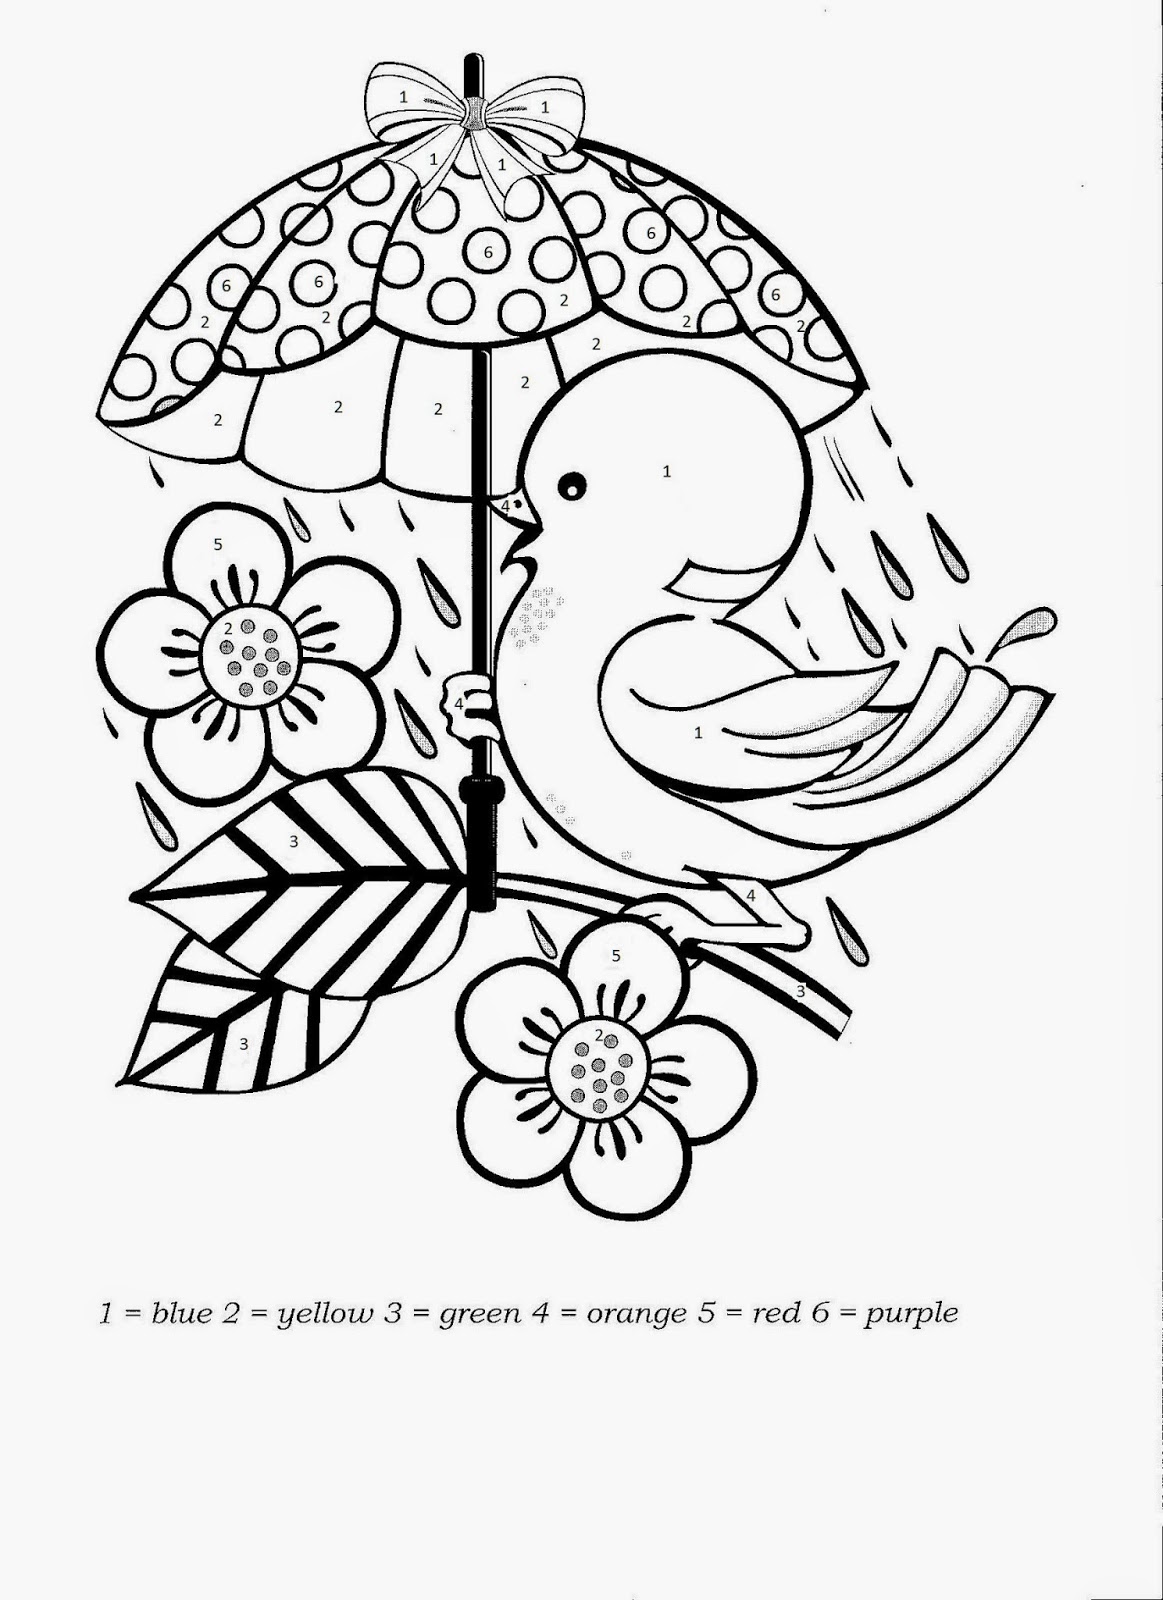 Umbrella Bird Coloring Pages for Kids